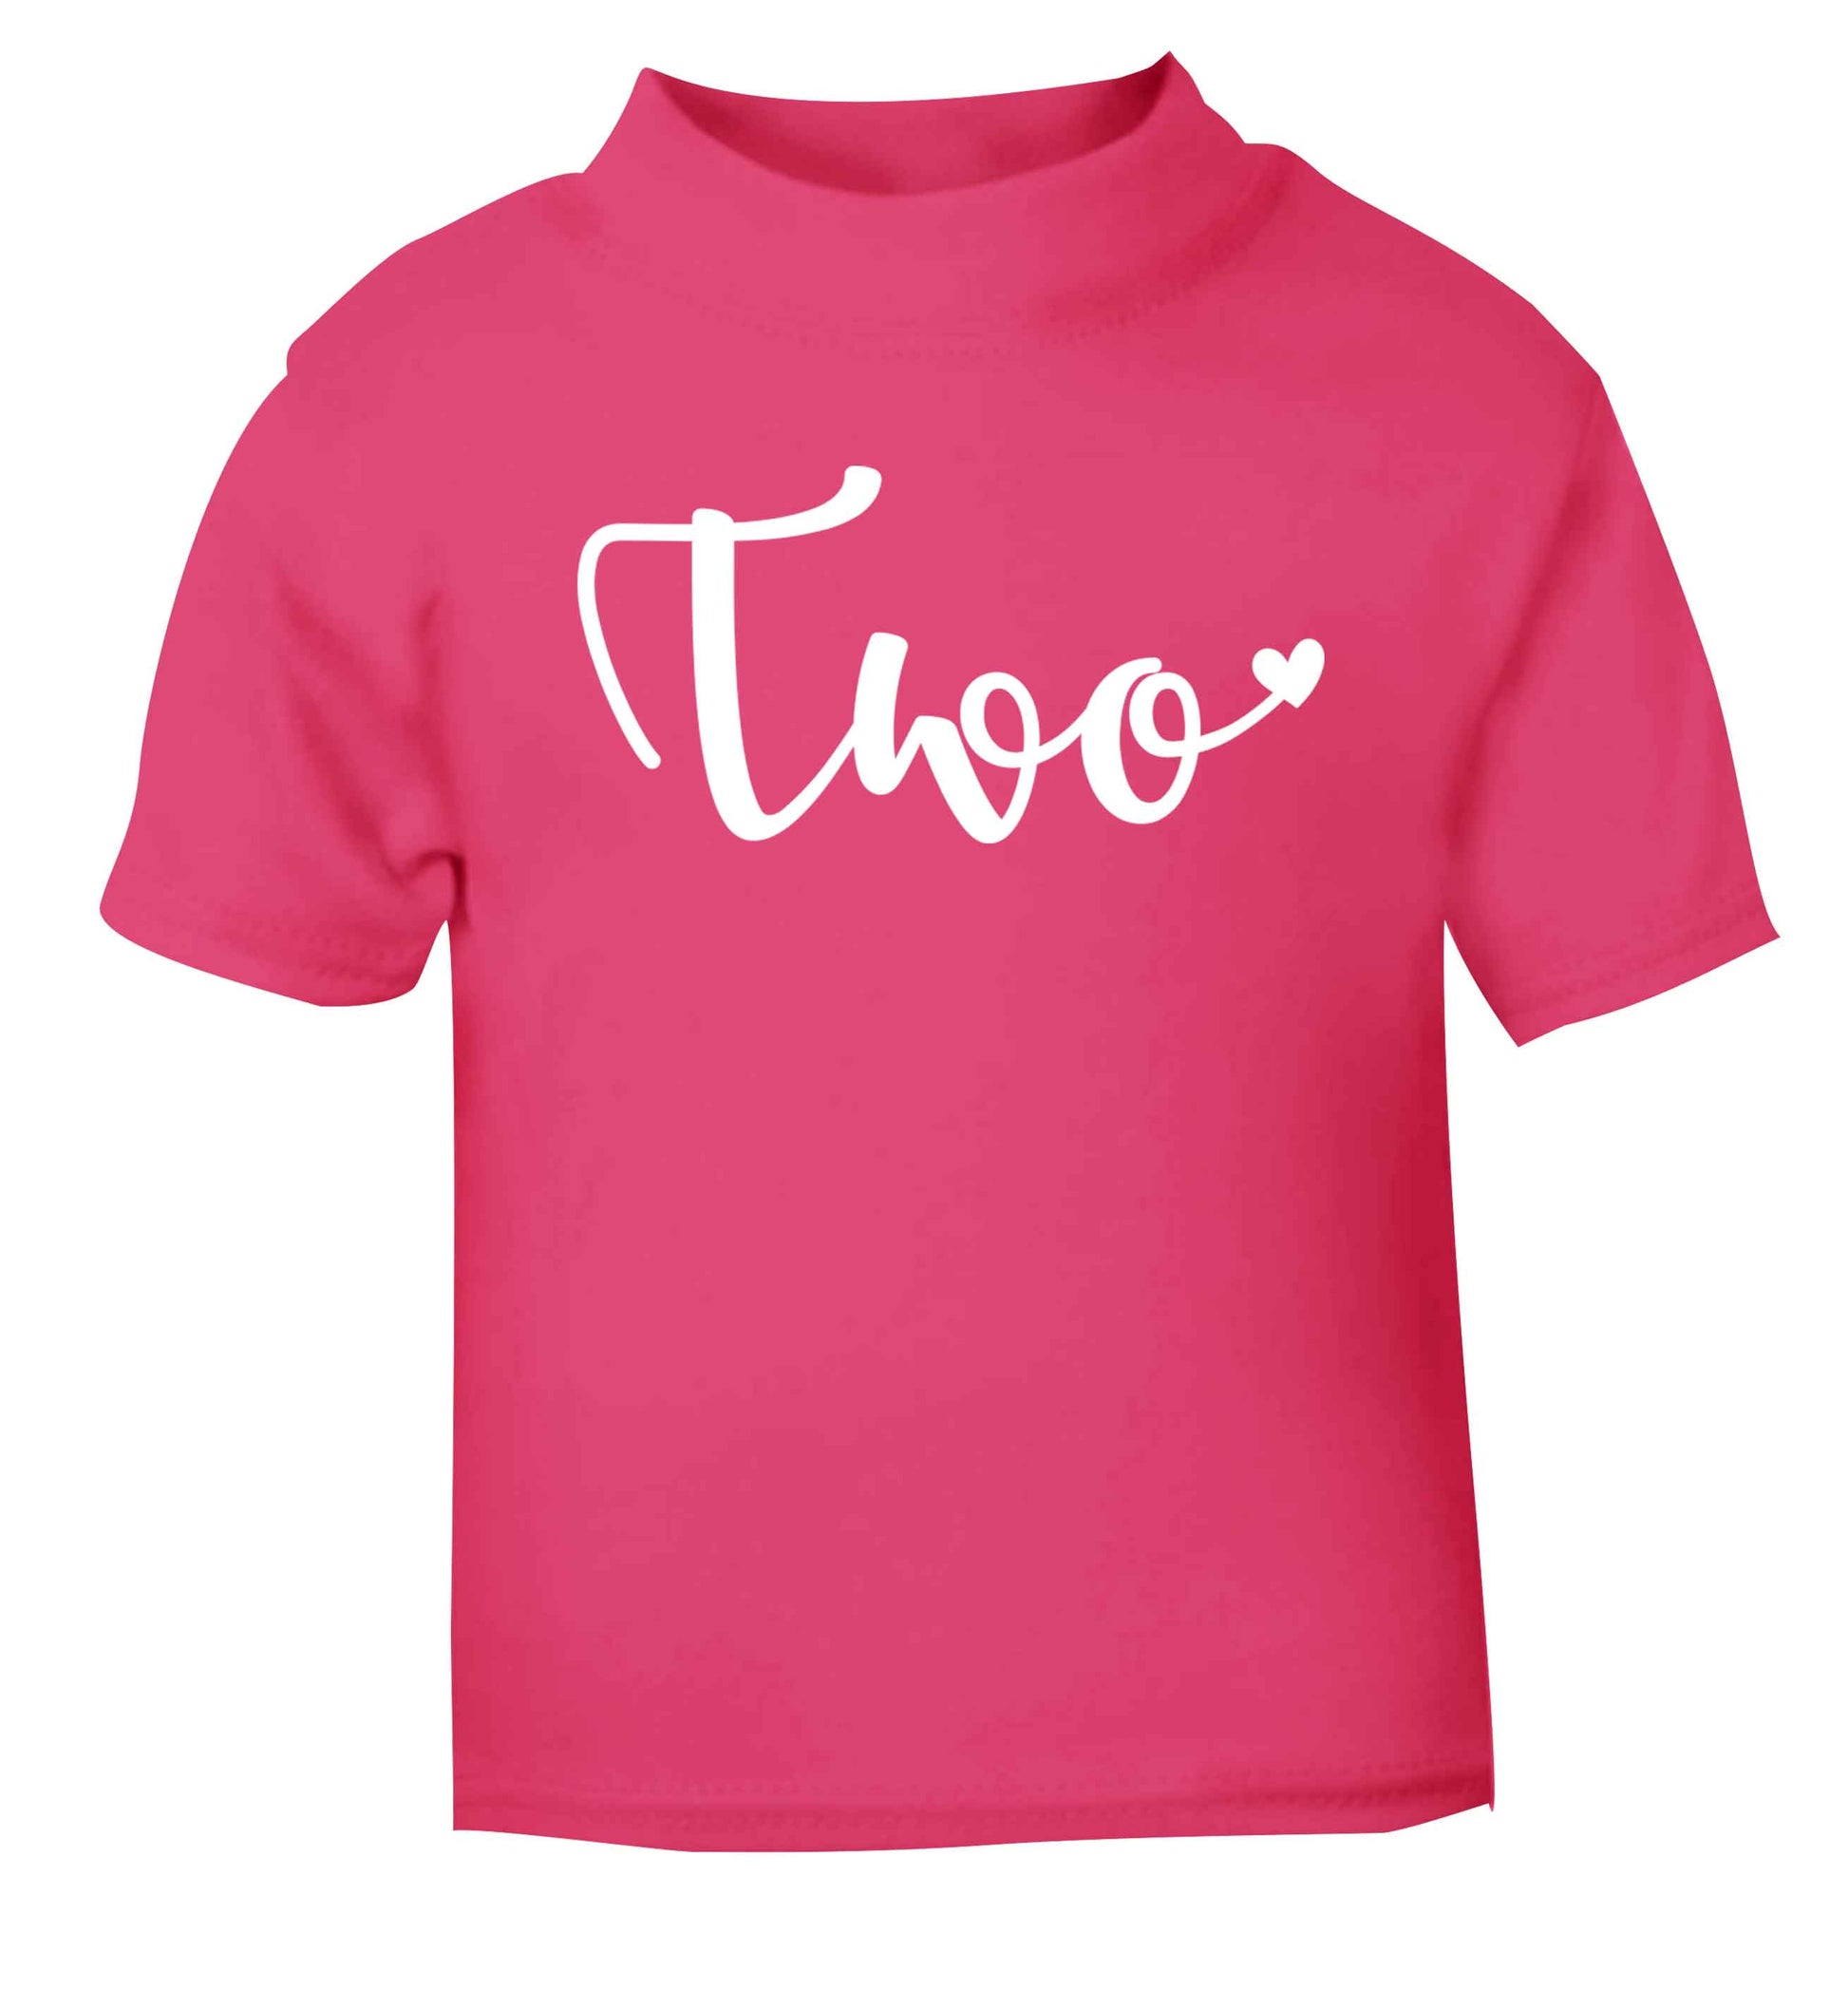 Two and Heart pink baby toddler Tshirt 2 Years